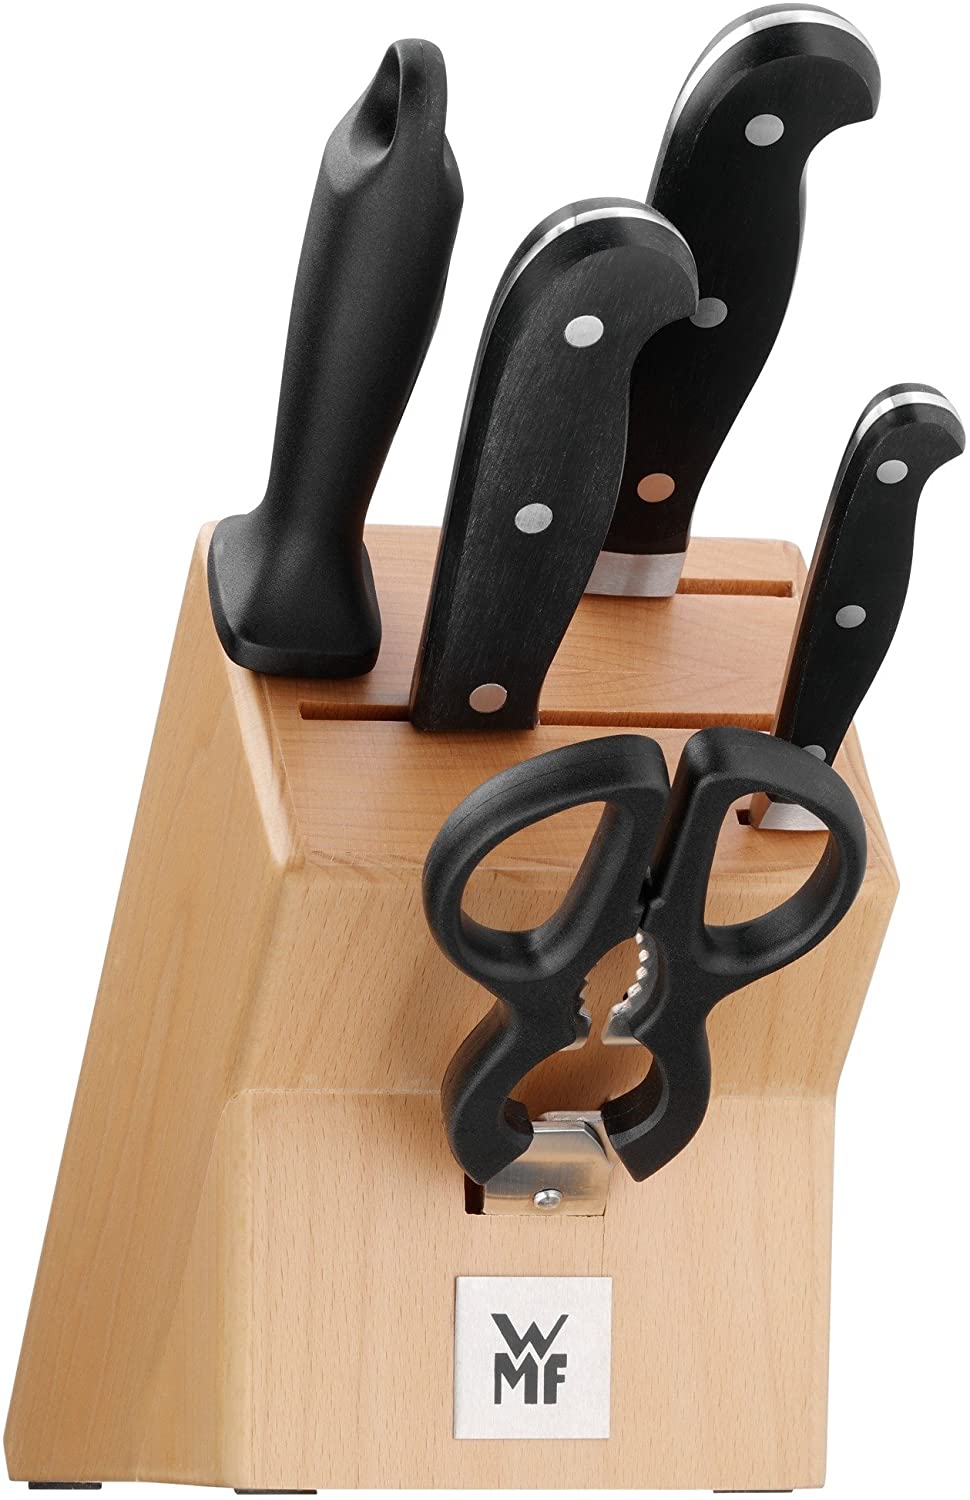 WMF Knife Block with Knife Set, Forged Performance Cut and One Block Beech Wood